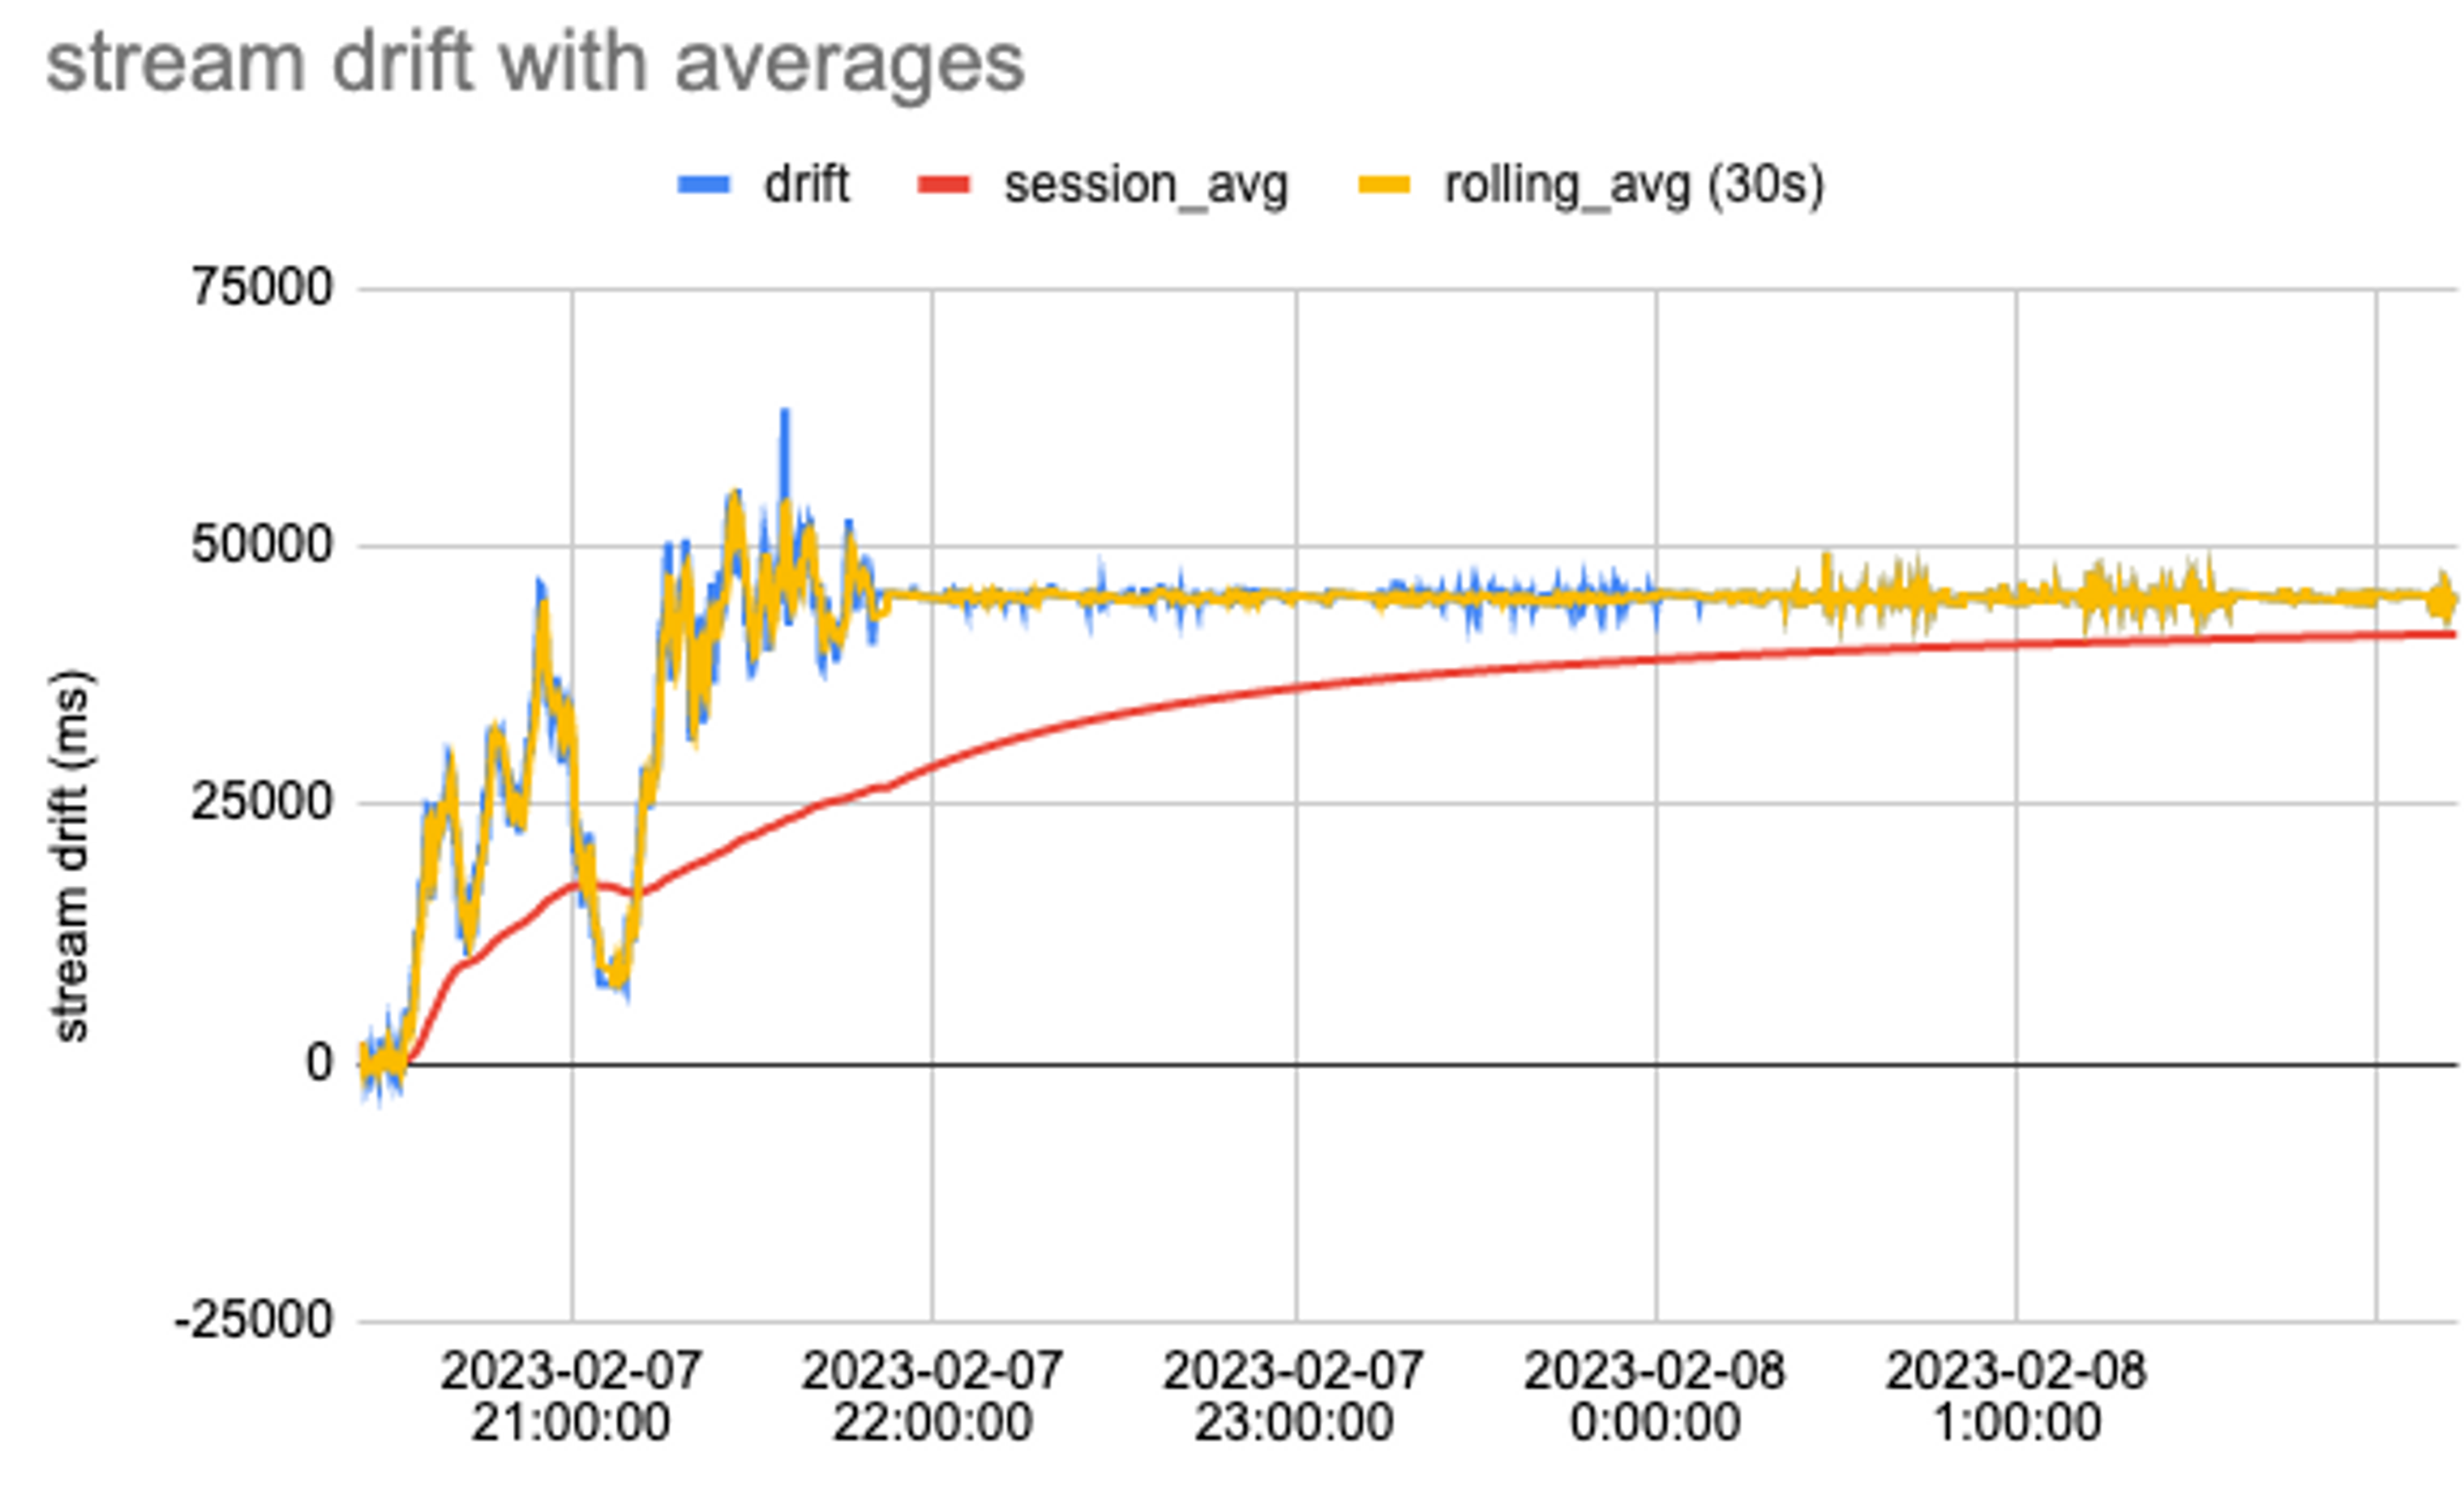 A chart depicting stream drift with averages over time